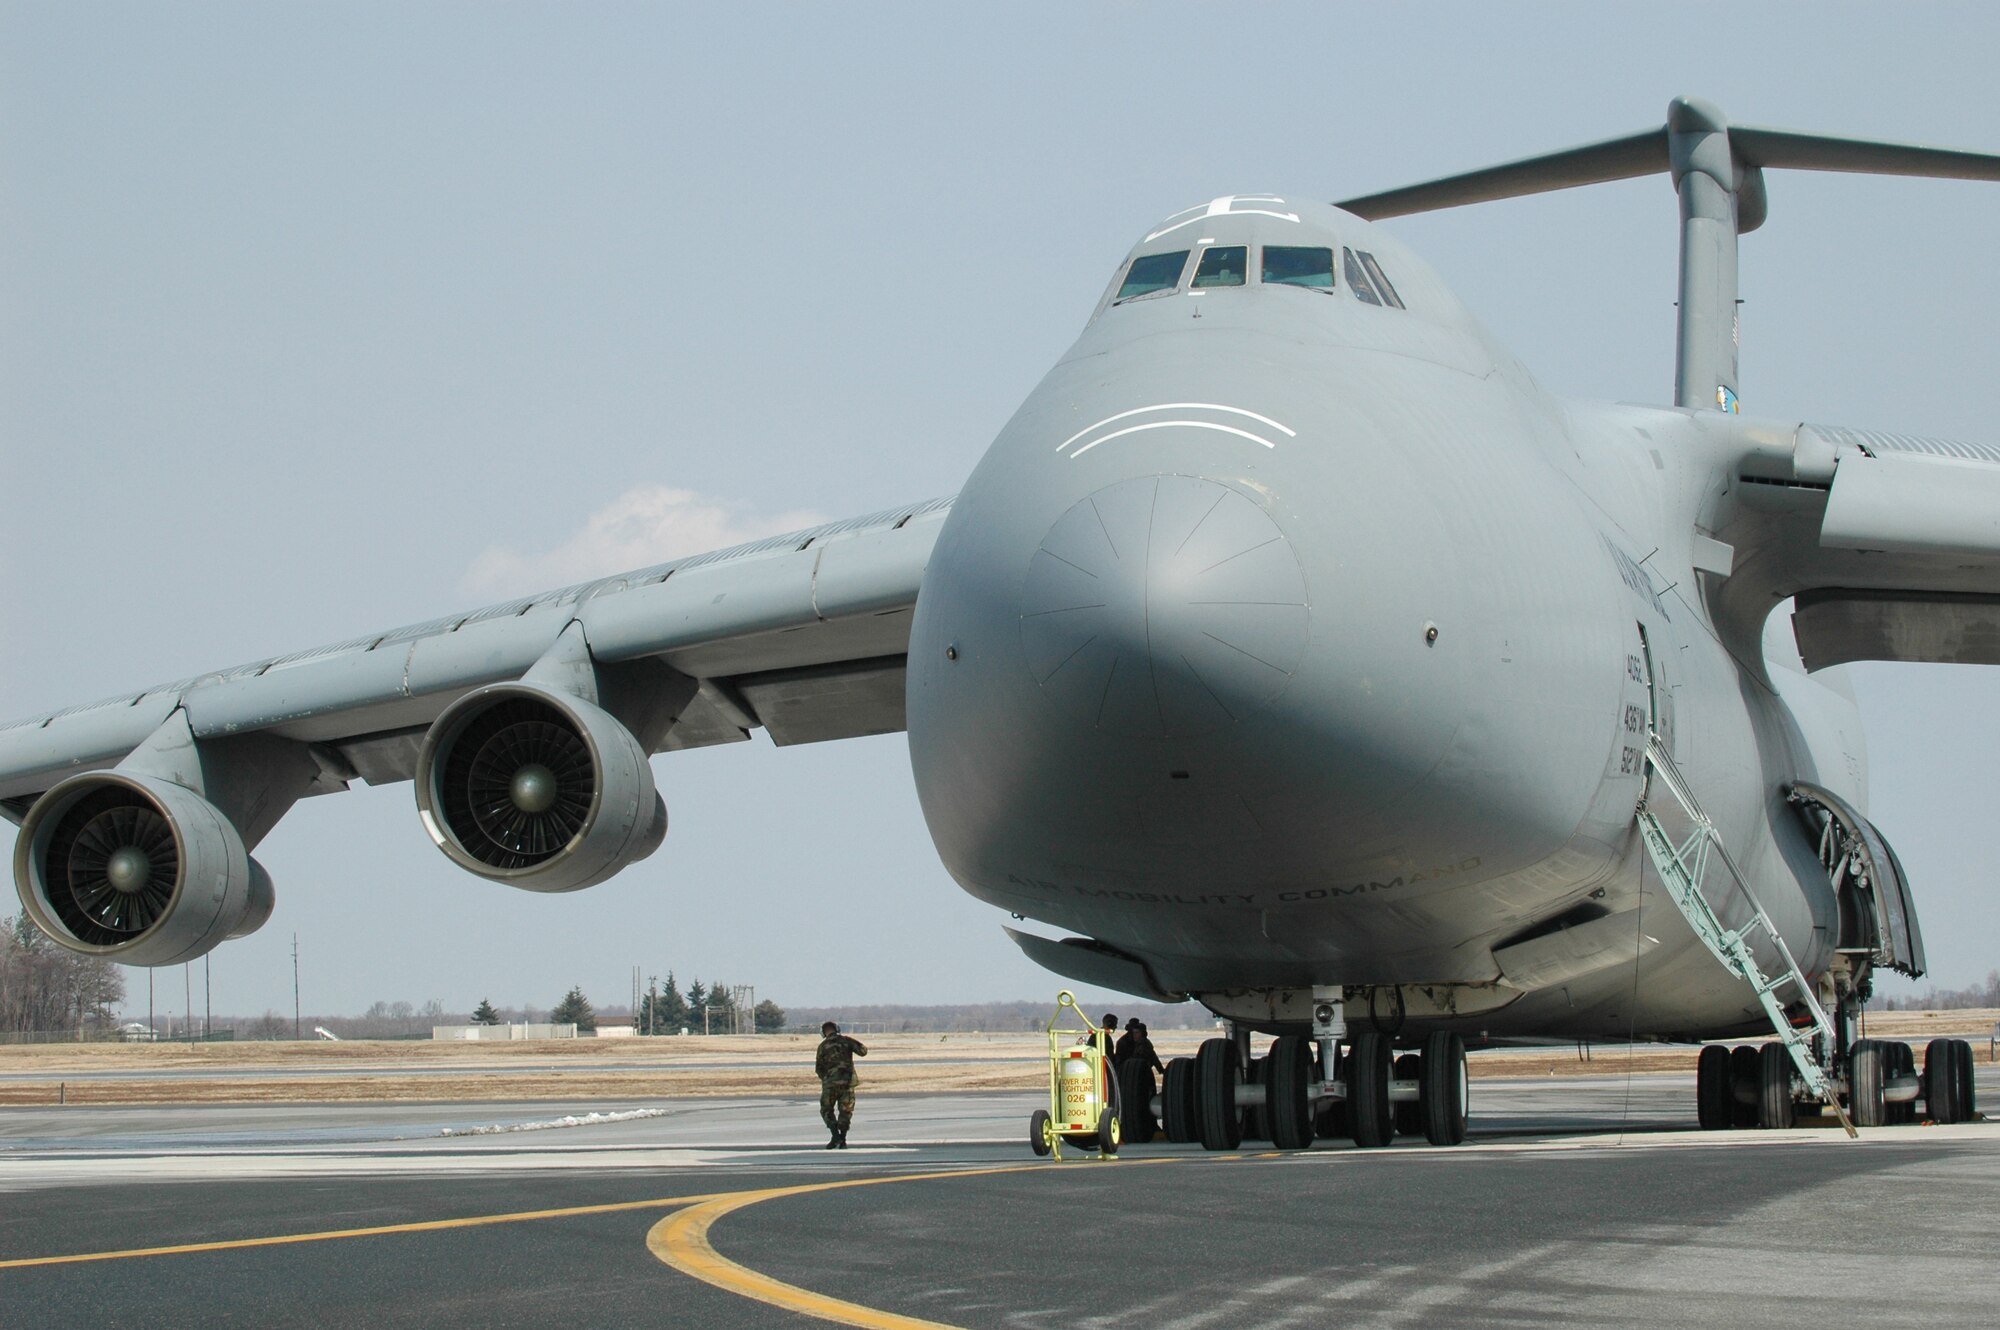 It was the end of an era March 10 for the 326th Airlift Squadron as an aircrew parked a C-5 Galaxy on the Dover Air Force Base, Del., runway. It was the last C-5 flight for the squadron, a unit in the Air Force Reserve Command's 512th Airlift Wing. The squadron, which has been flying the C-5 since 1973, is transitioning to the C-17 Globemaster III, scheduled to arrive in June. (U.S. Air Force photo by 1st Lt. Marnee A.C. Losurdo)